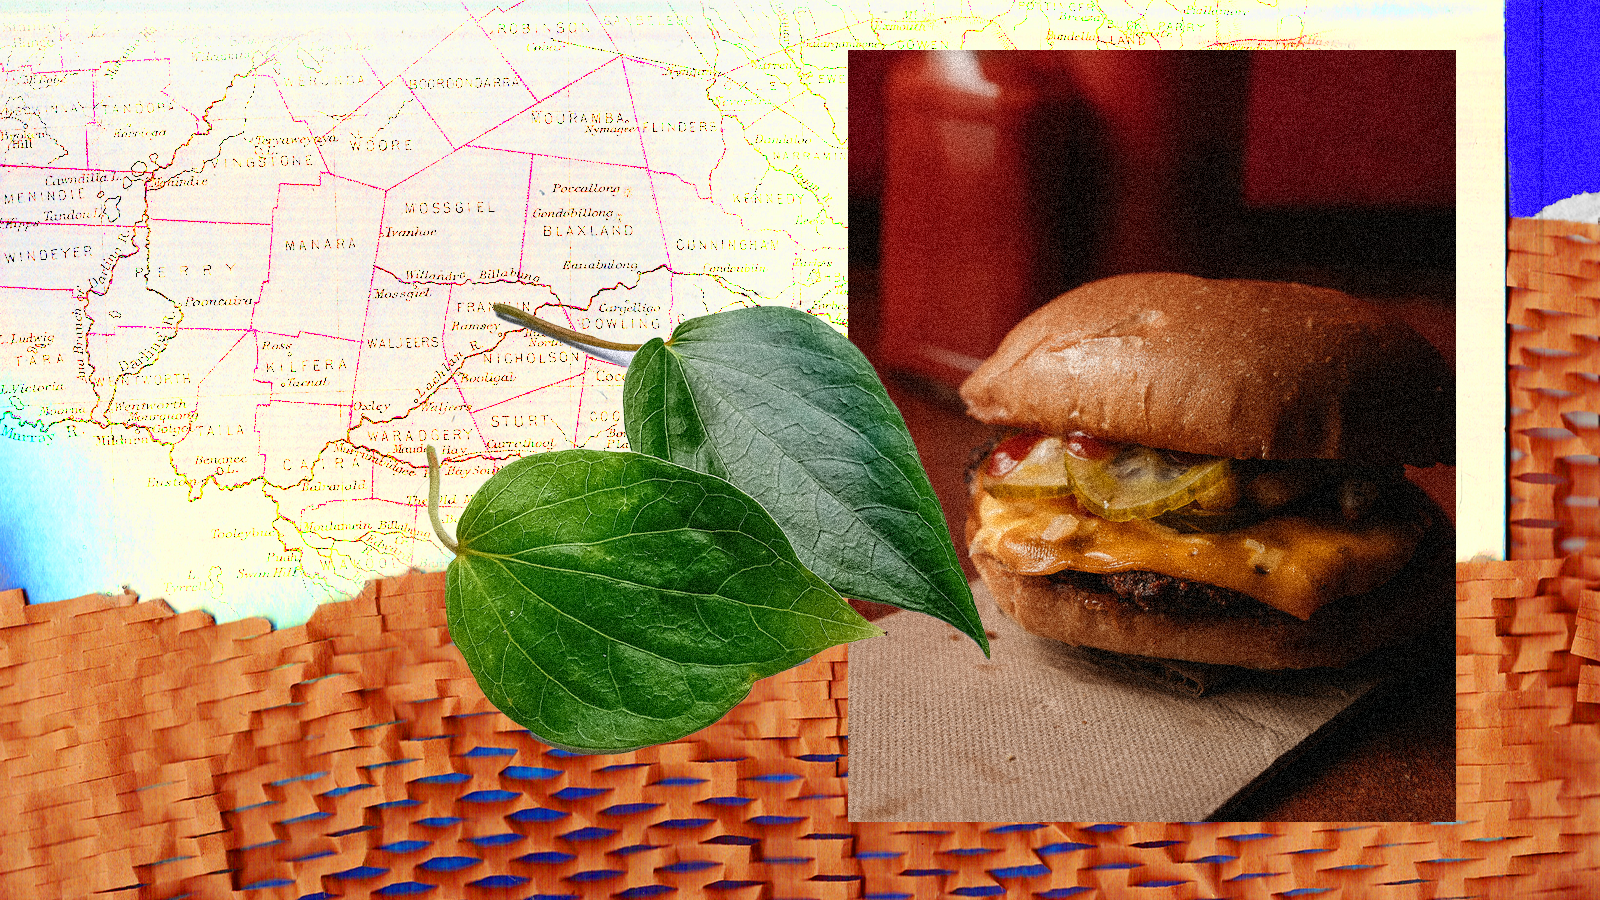 A photo of a burger superimposed on a map of Sydney along with several leaves. 